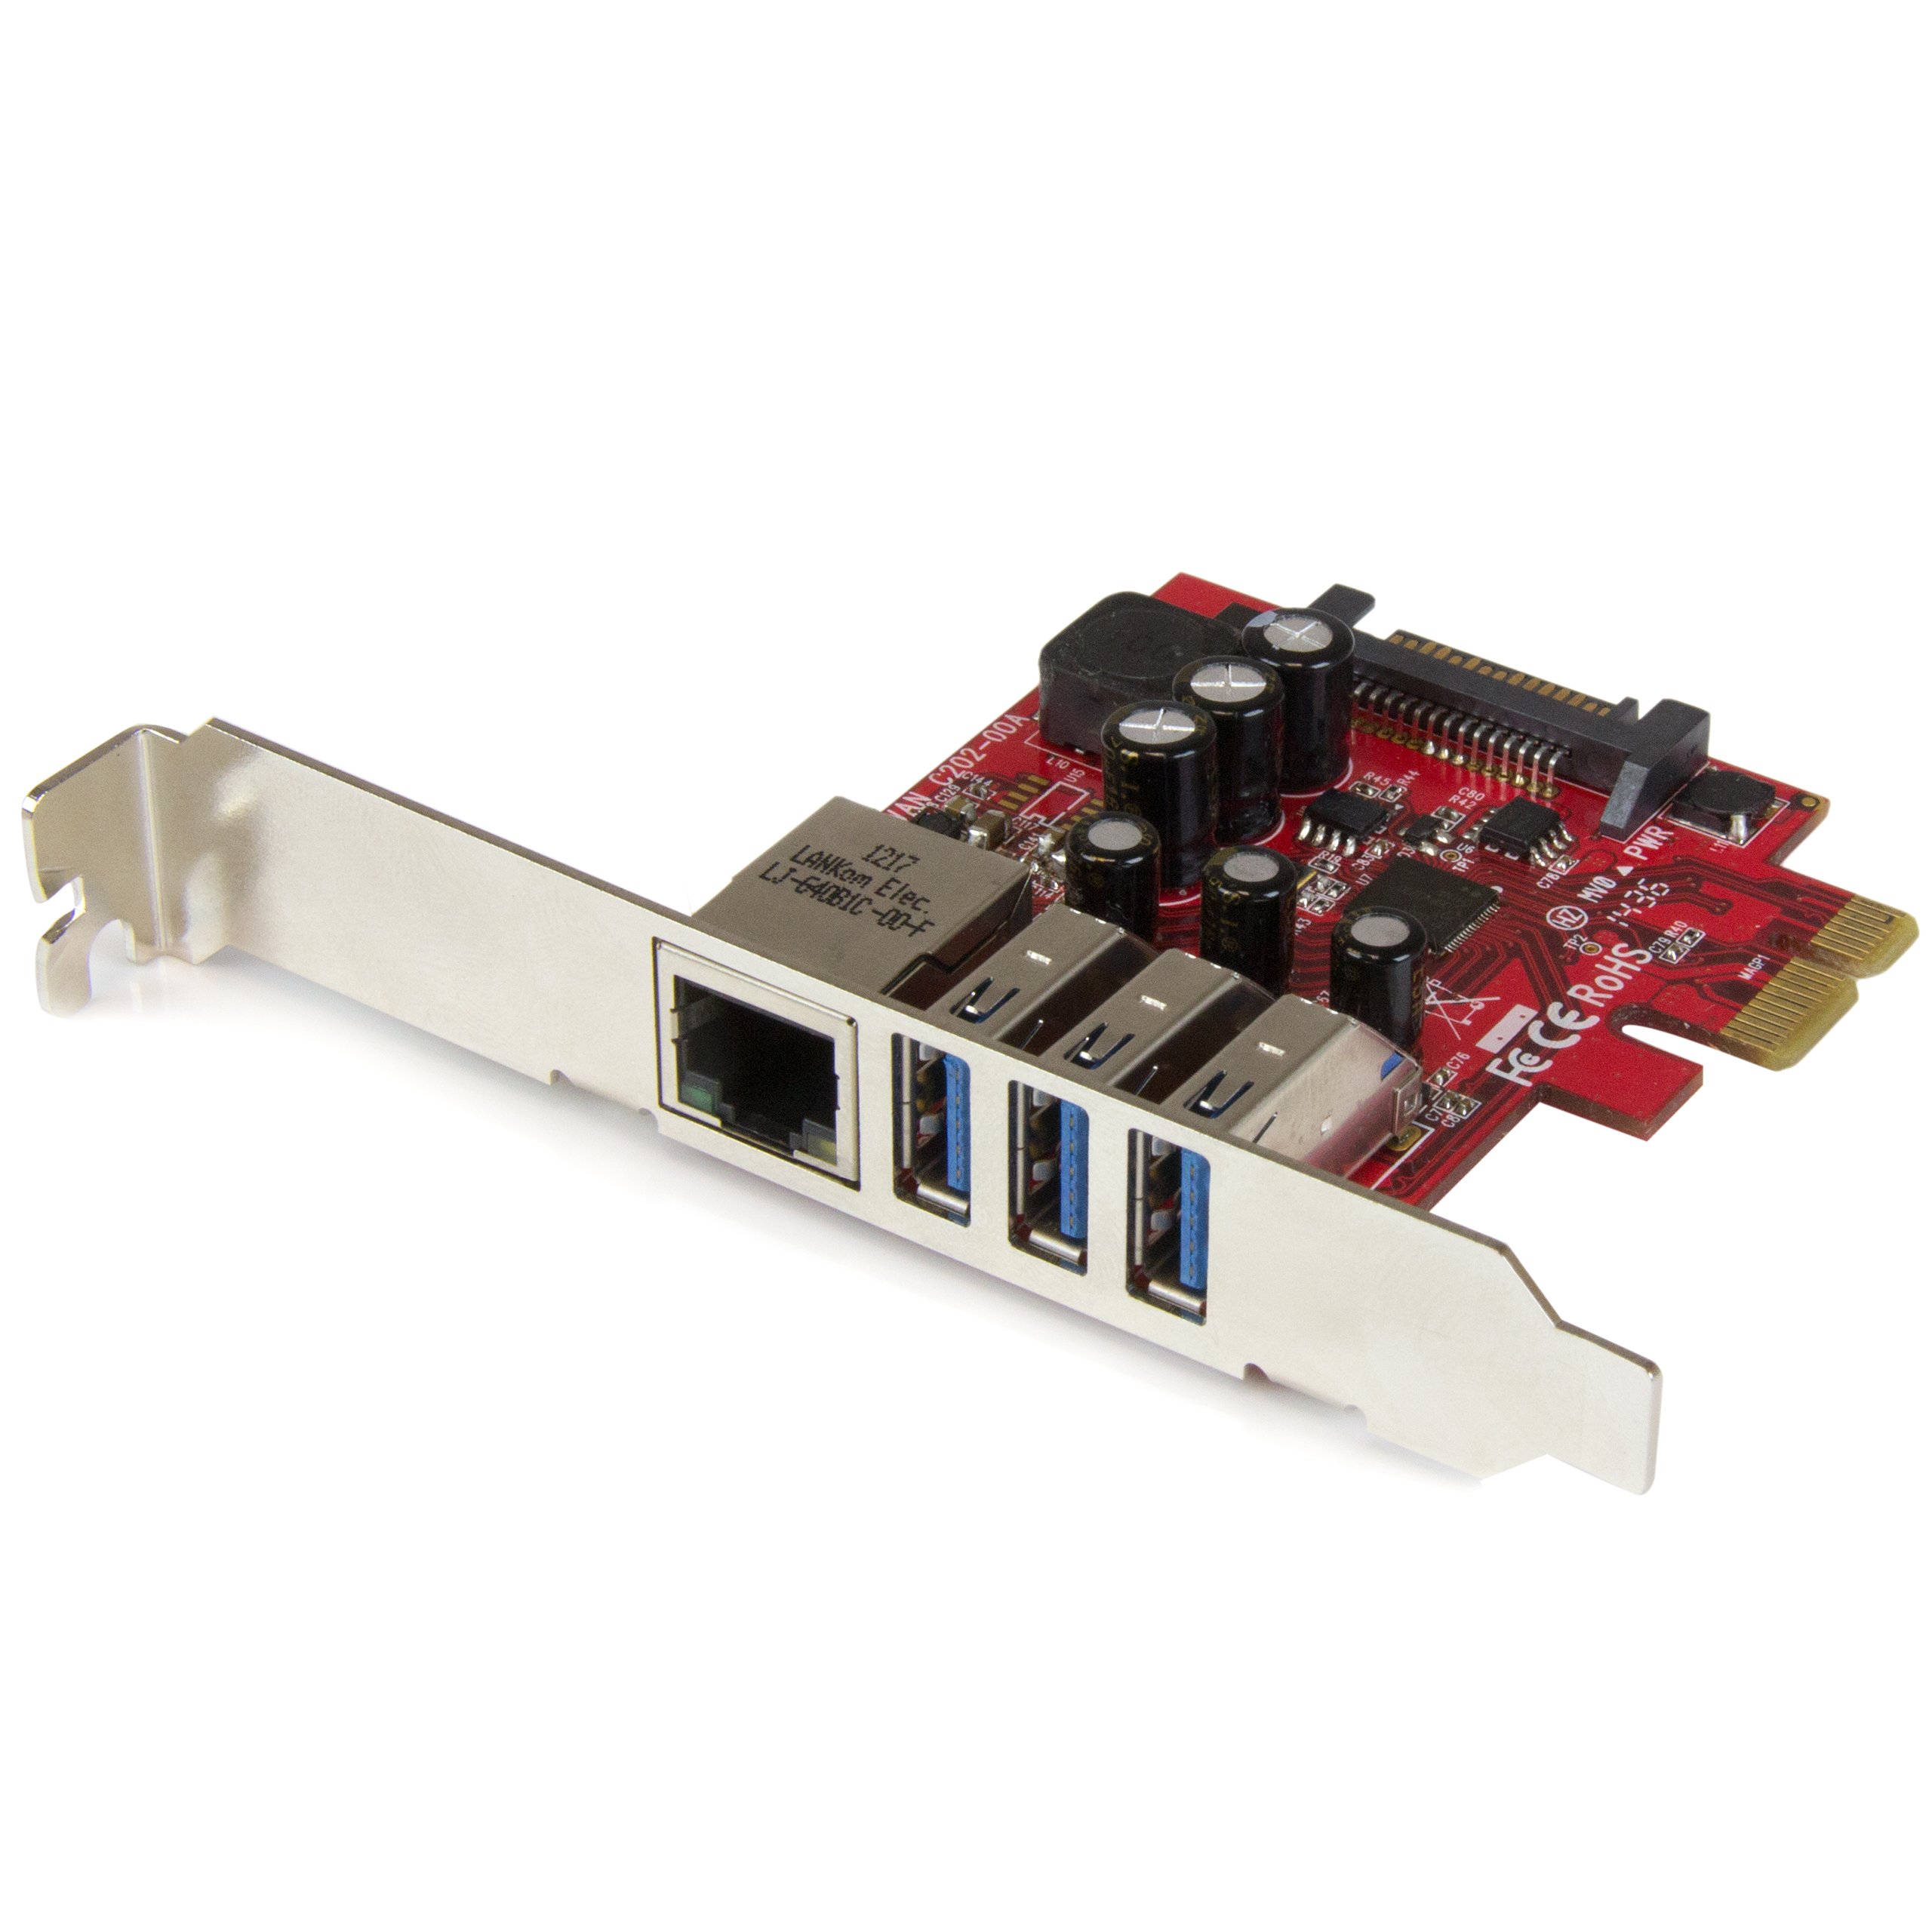 Scheda Espansione Pcie Usb Startech Comp Cards And Adapters Pexusb3s3ge 65030860796